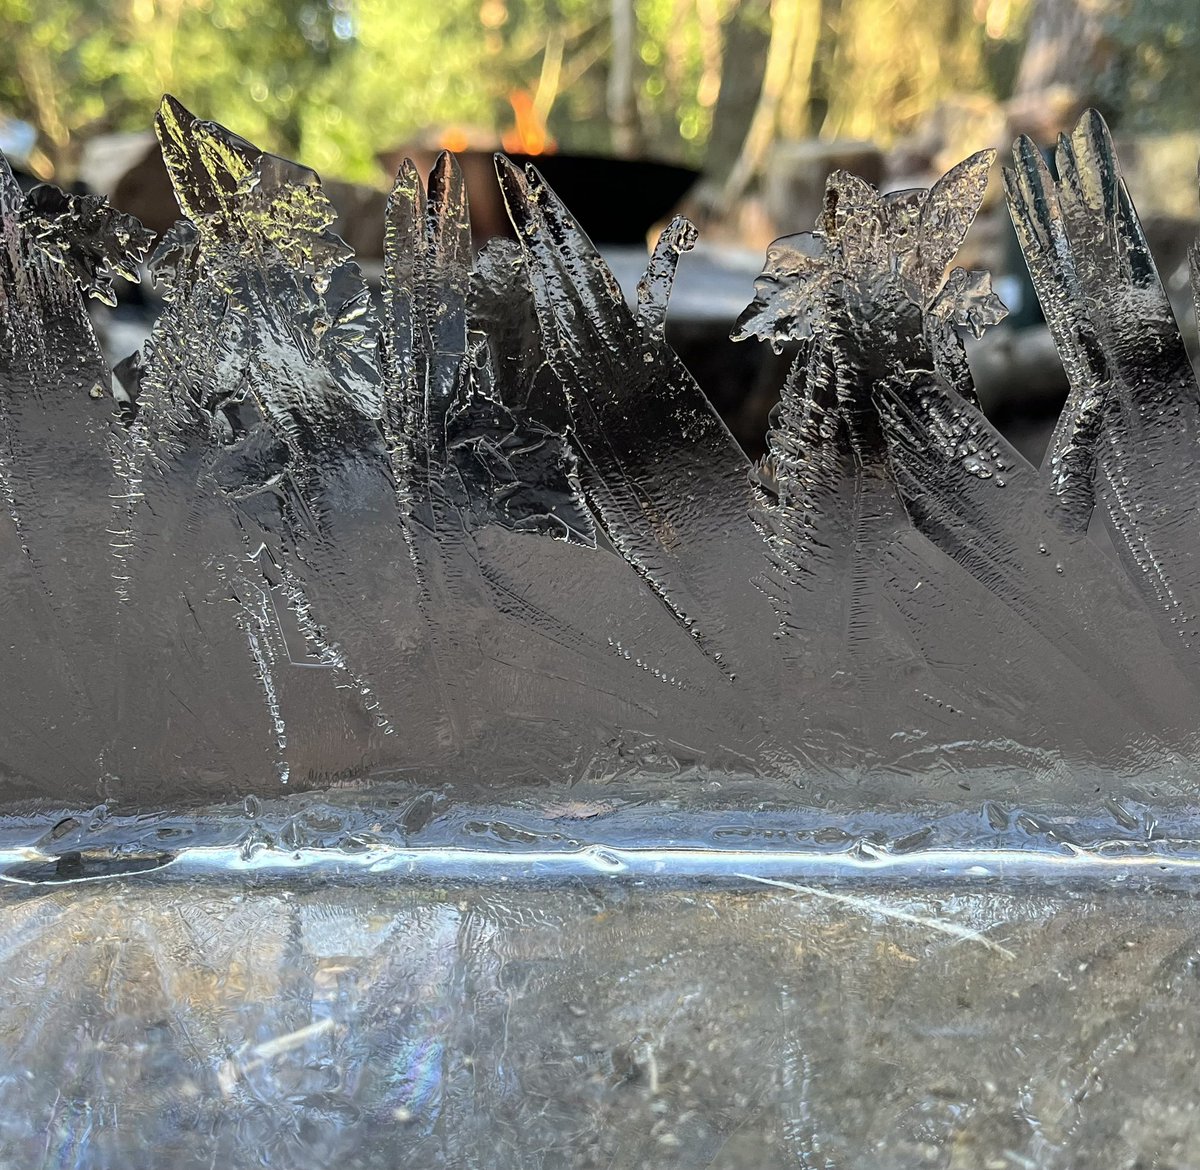 Ice and fire at Forest school today. Beautiful ice crystals from our water trough.